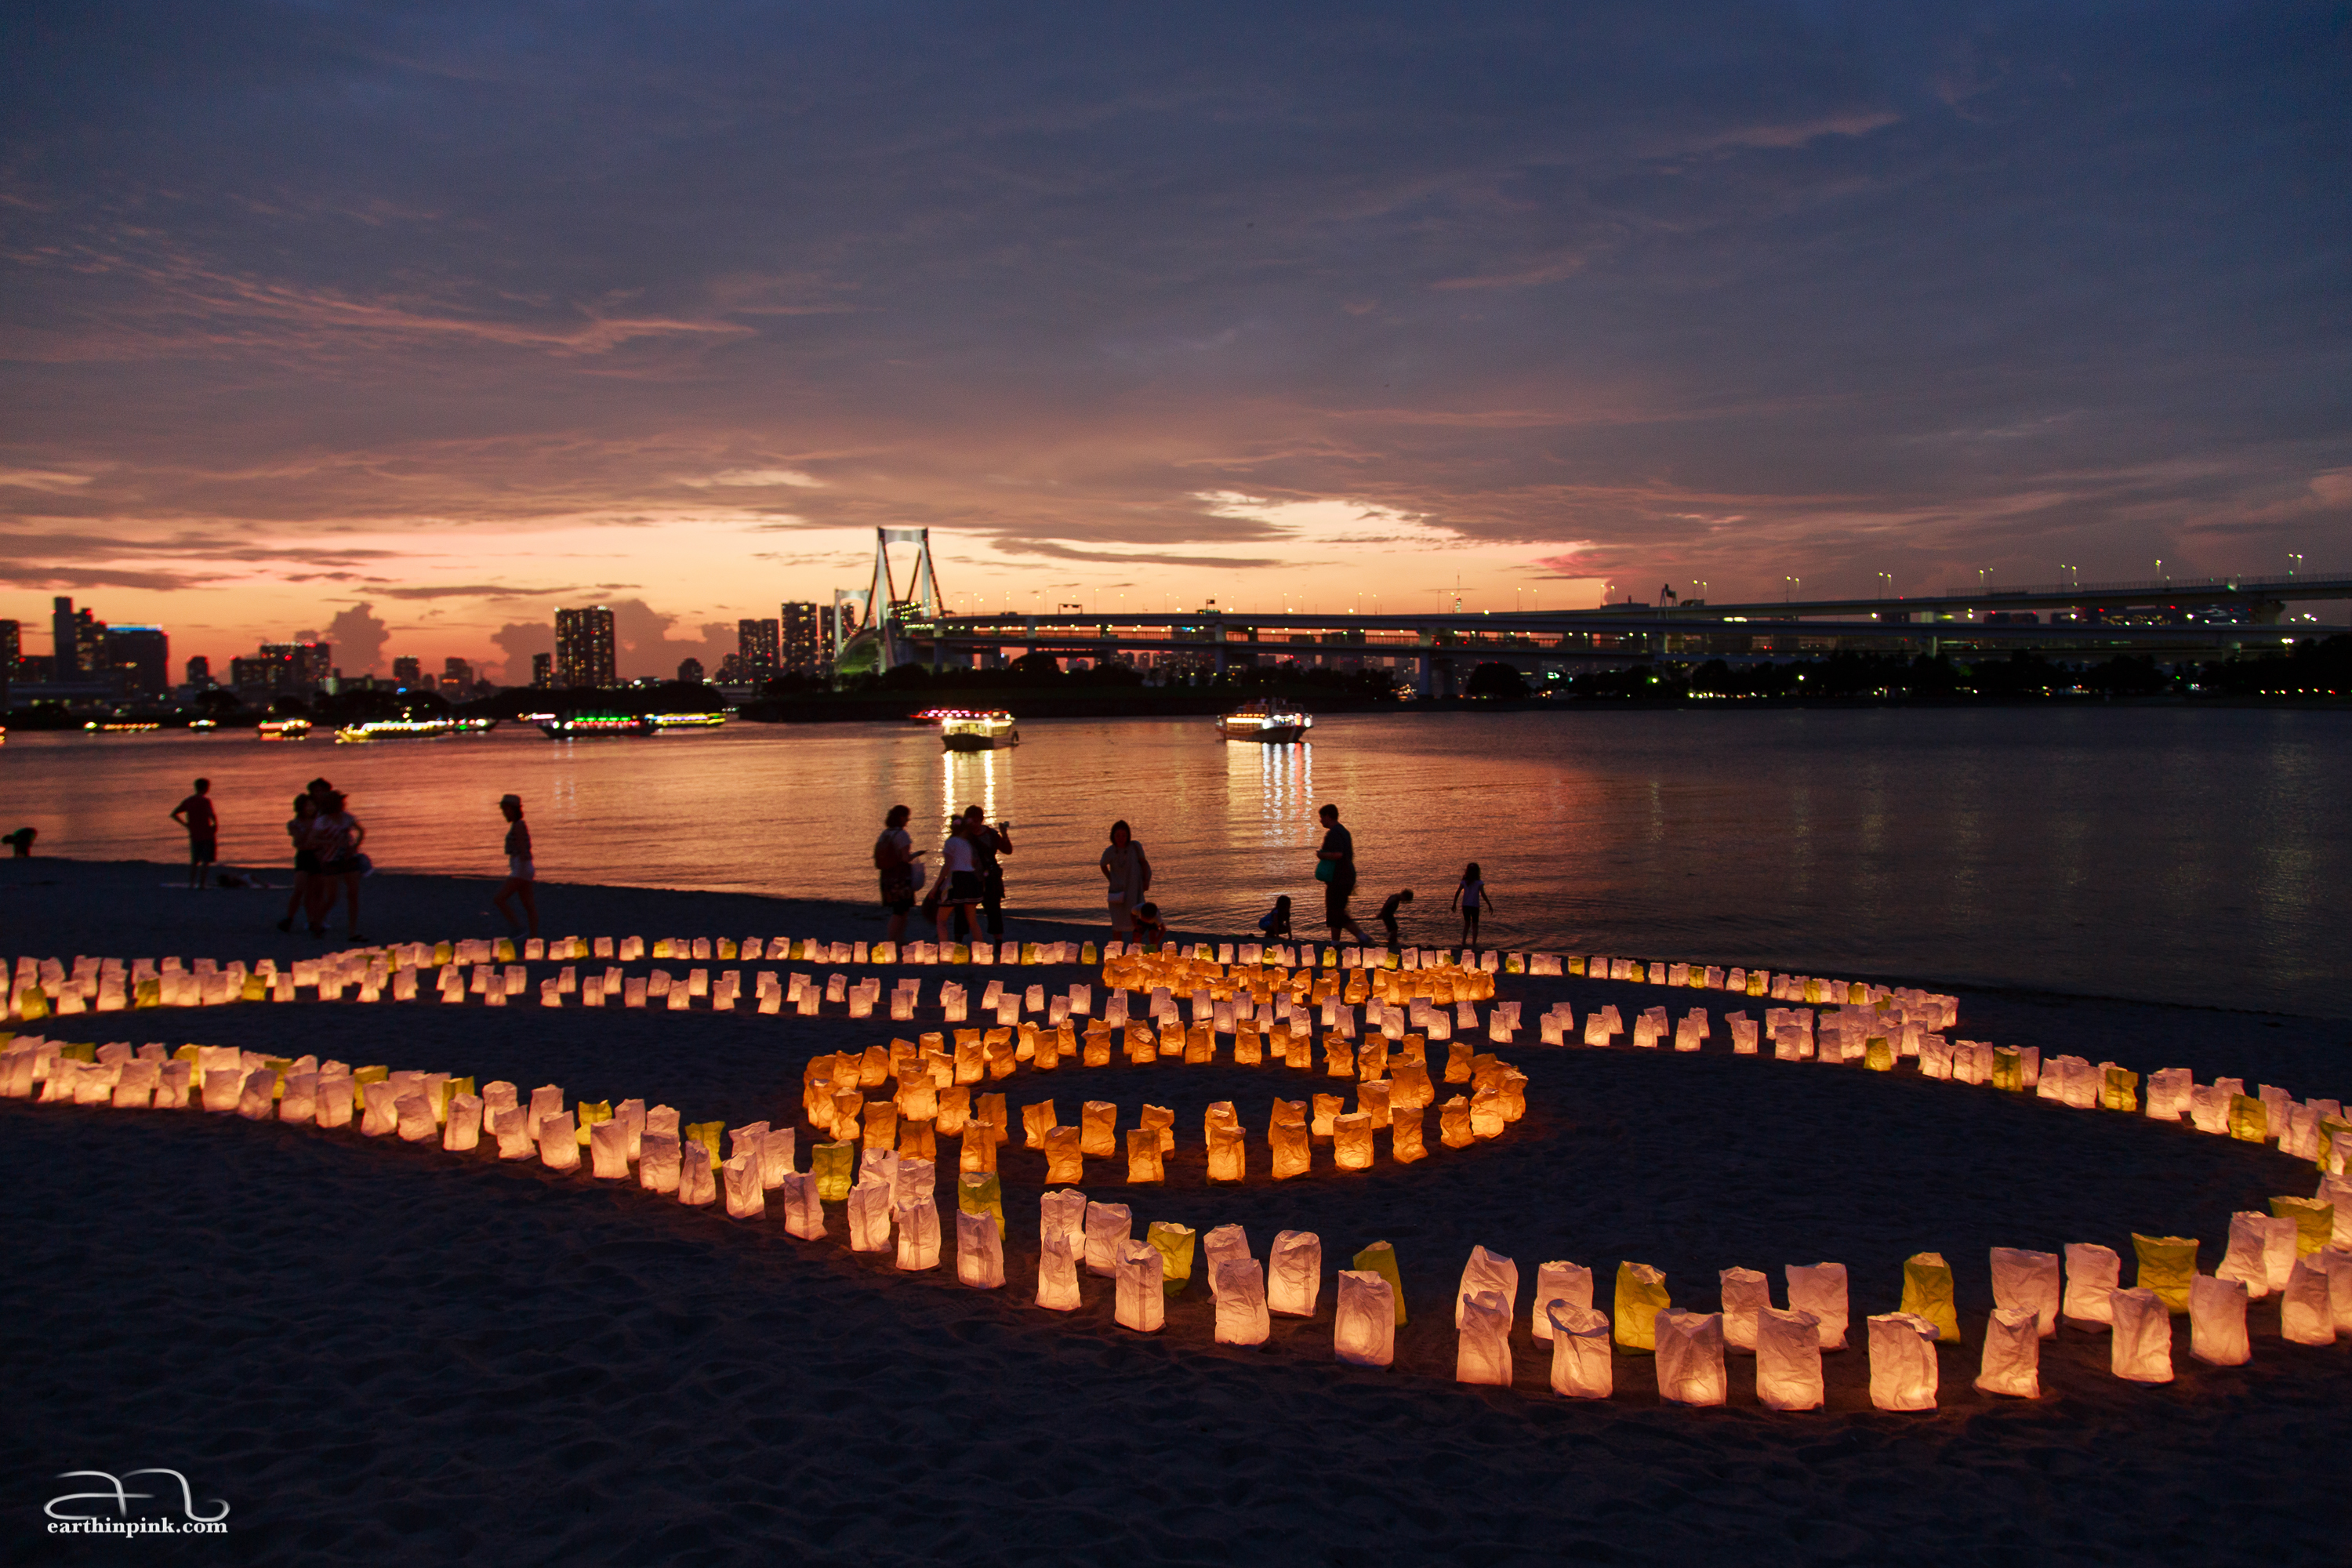 Paper lanterns and stunning sunset colors in Odaiba.